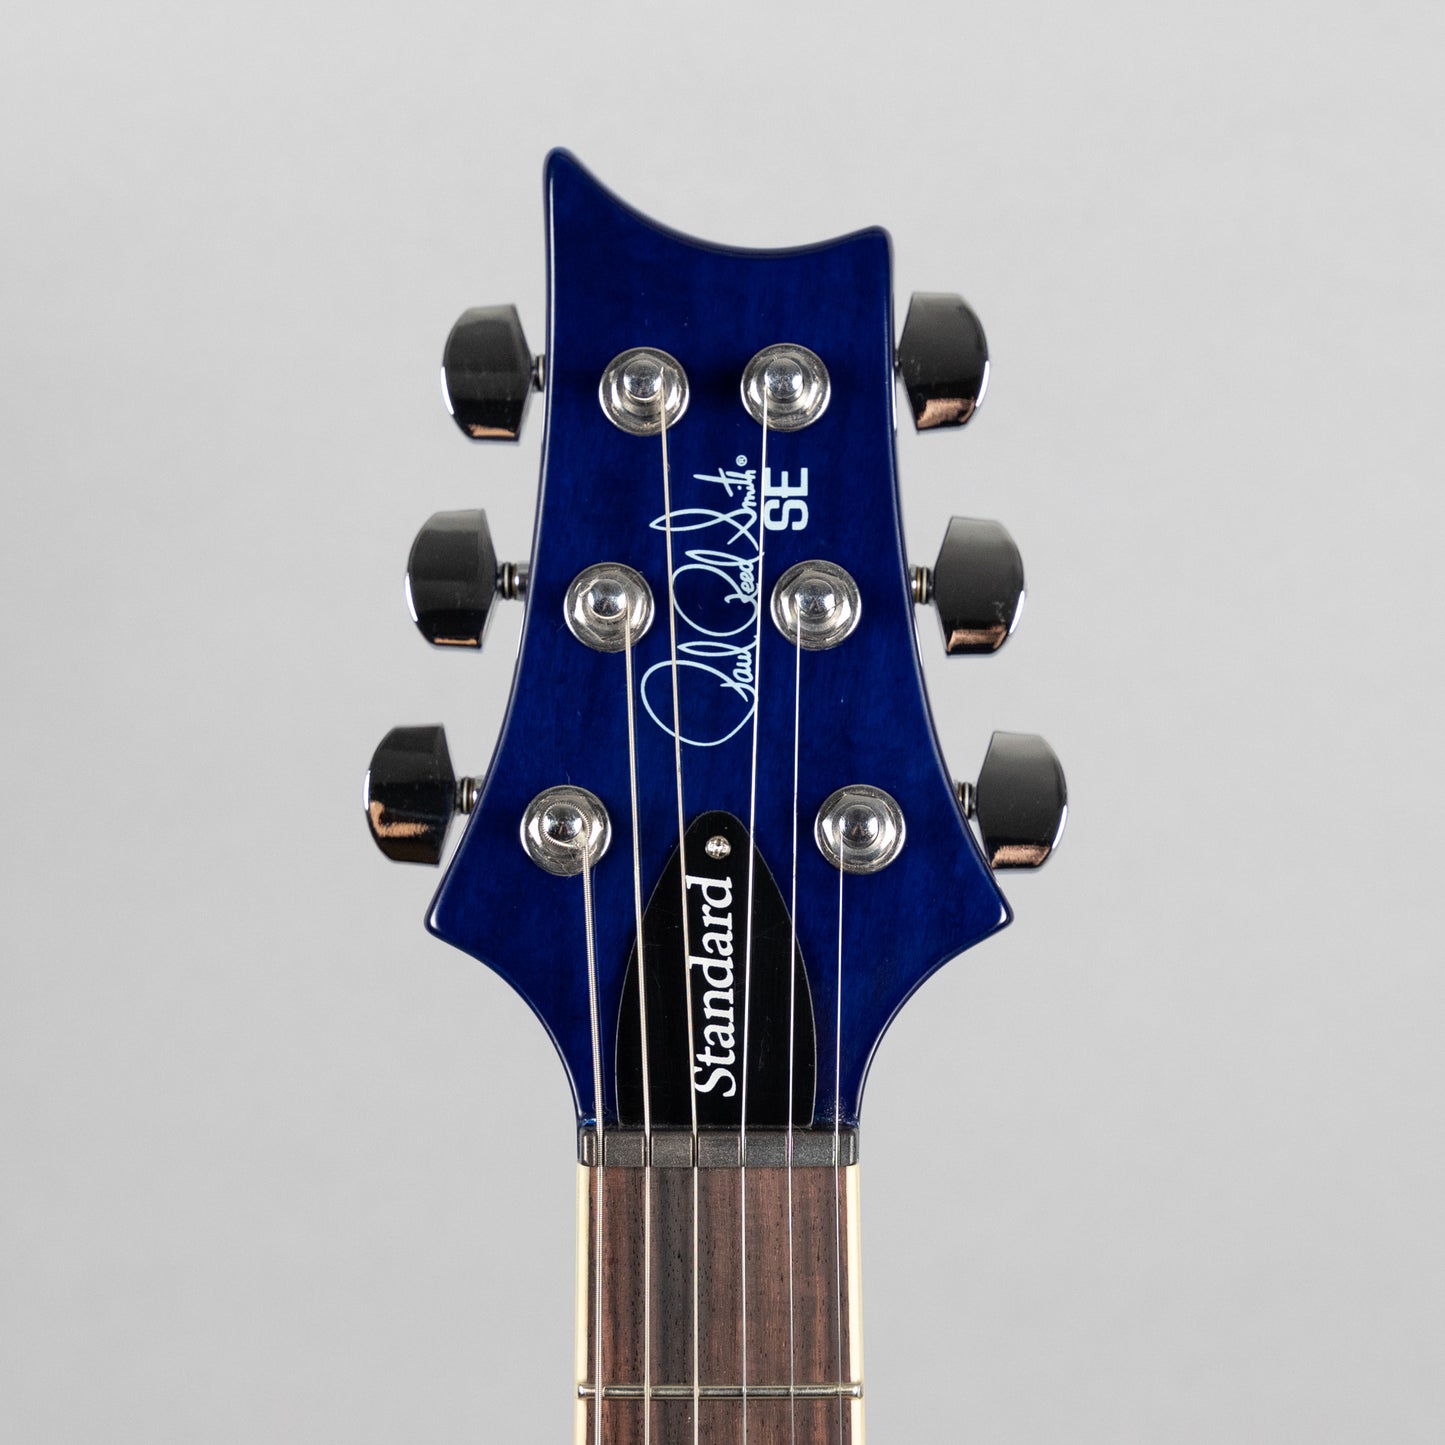 Paul Reed Smith SE Standard 24-08 in Translucent Blue (CTIF025193)